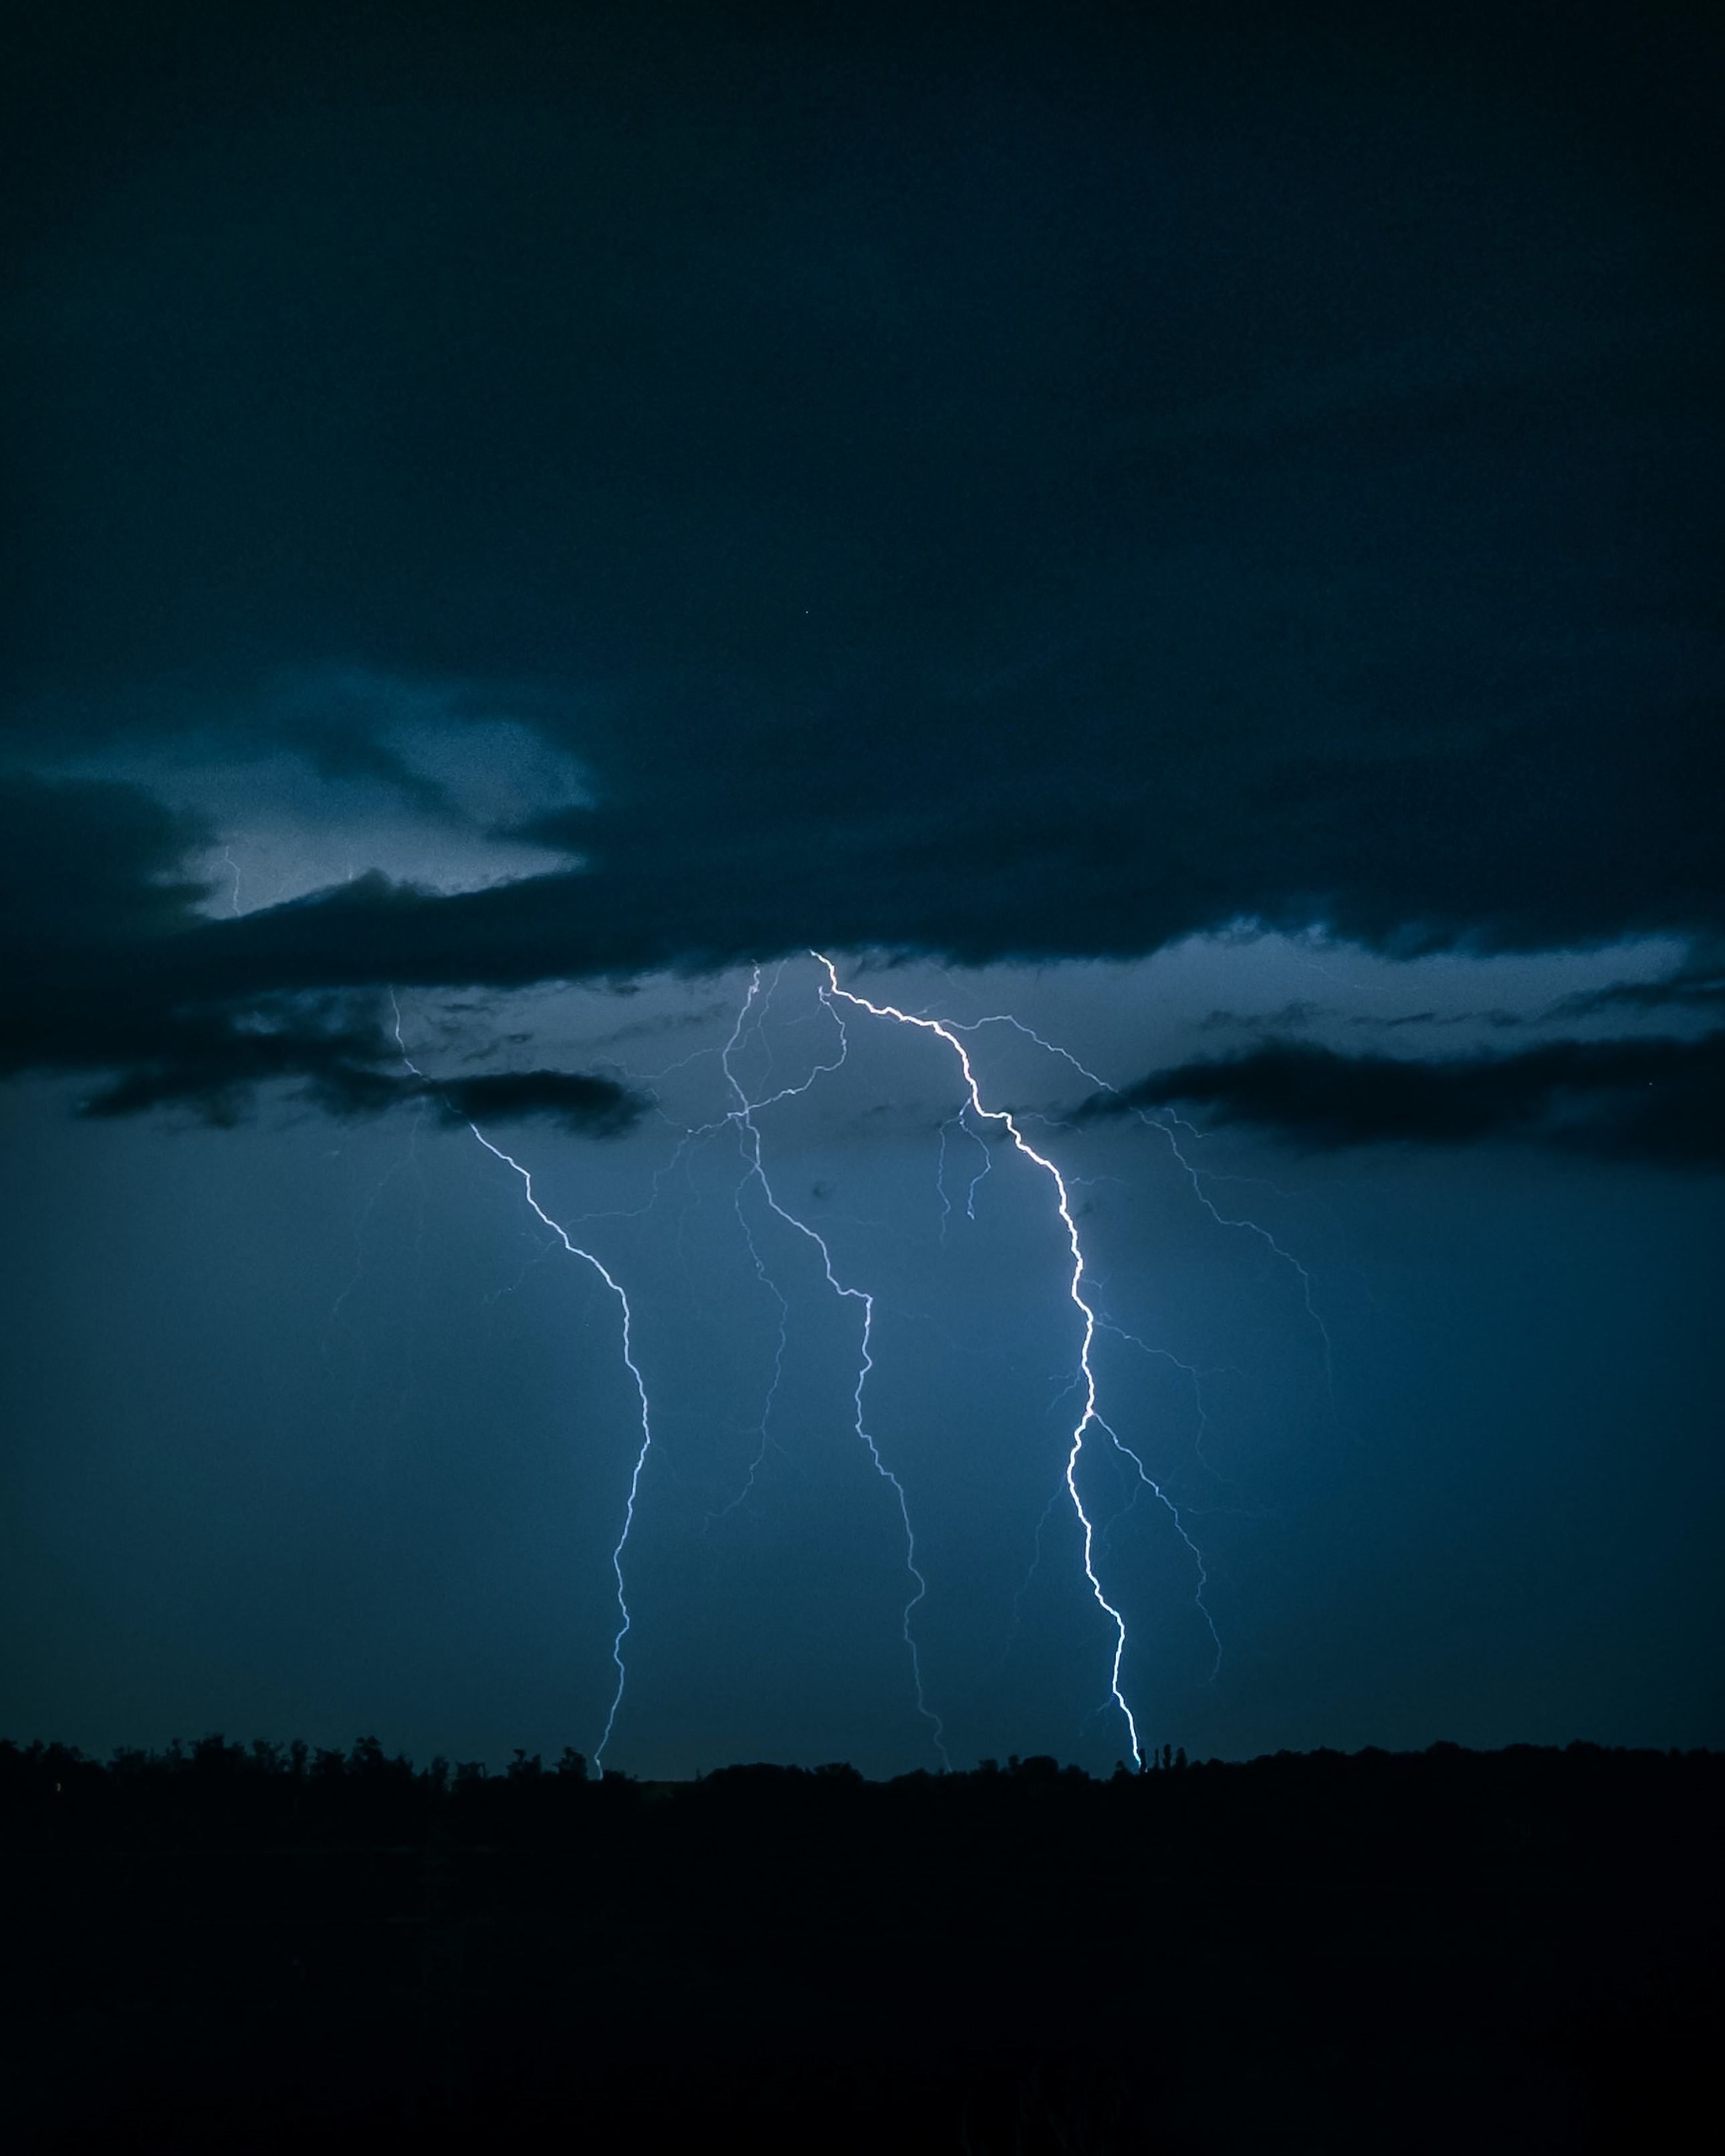 114301 free wallpaper 540x960 for phone, download images lightning, night, storm, dark 540x960 for mobile